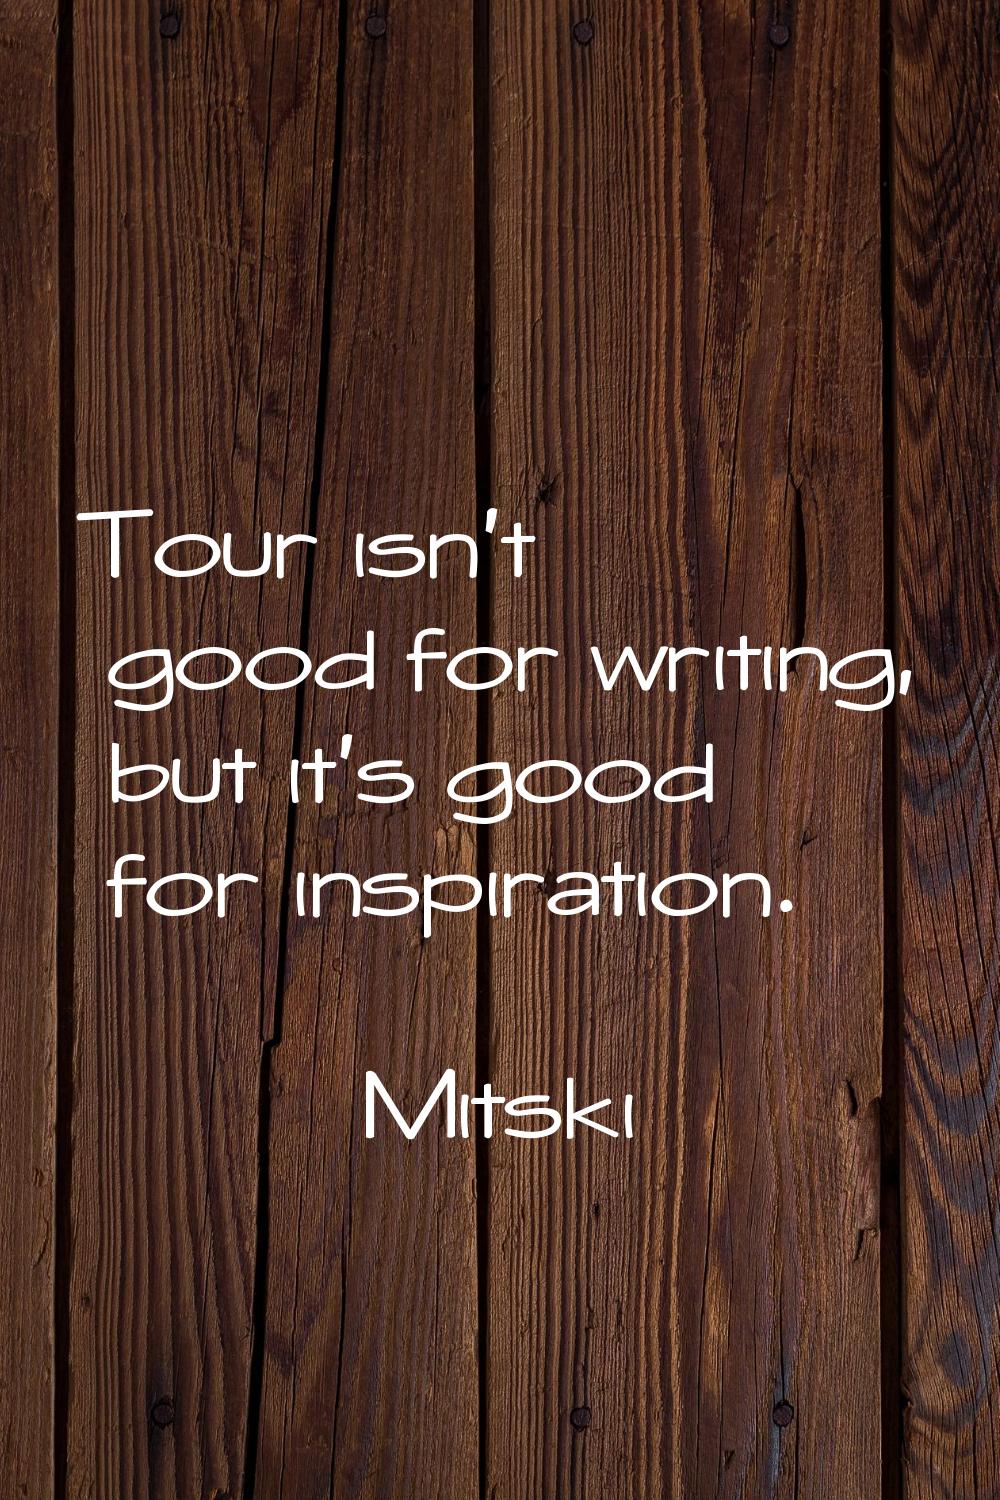 Tour isn't good for writing, but it's good for inspiration.